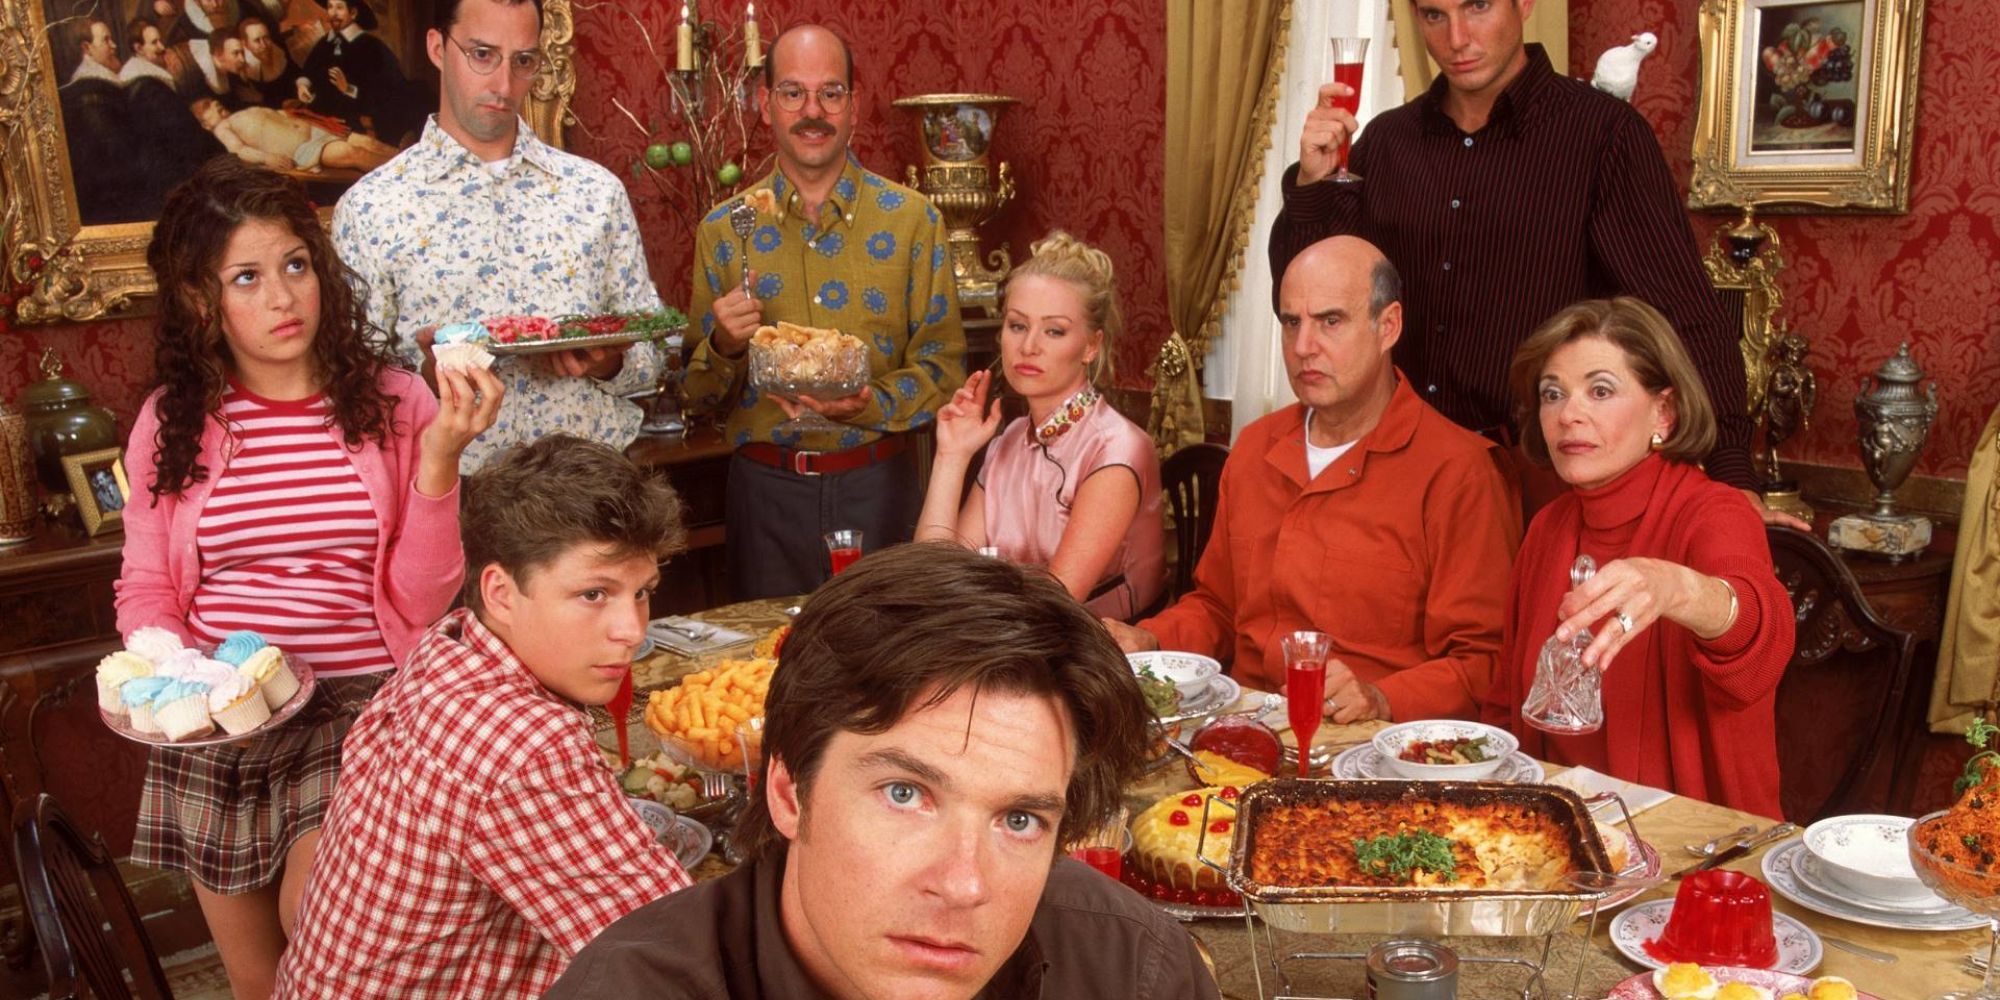 The Bluth family at a family dinner in Arrested Development